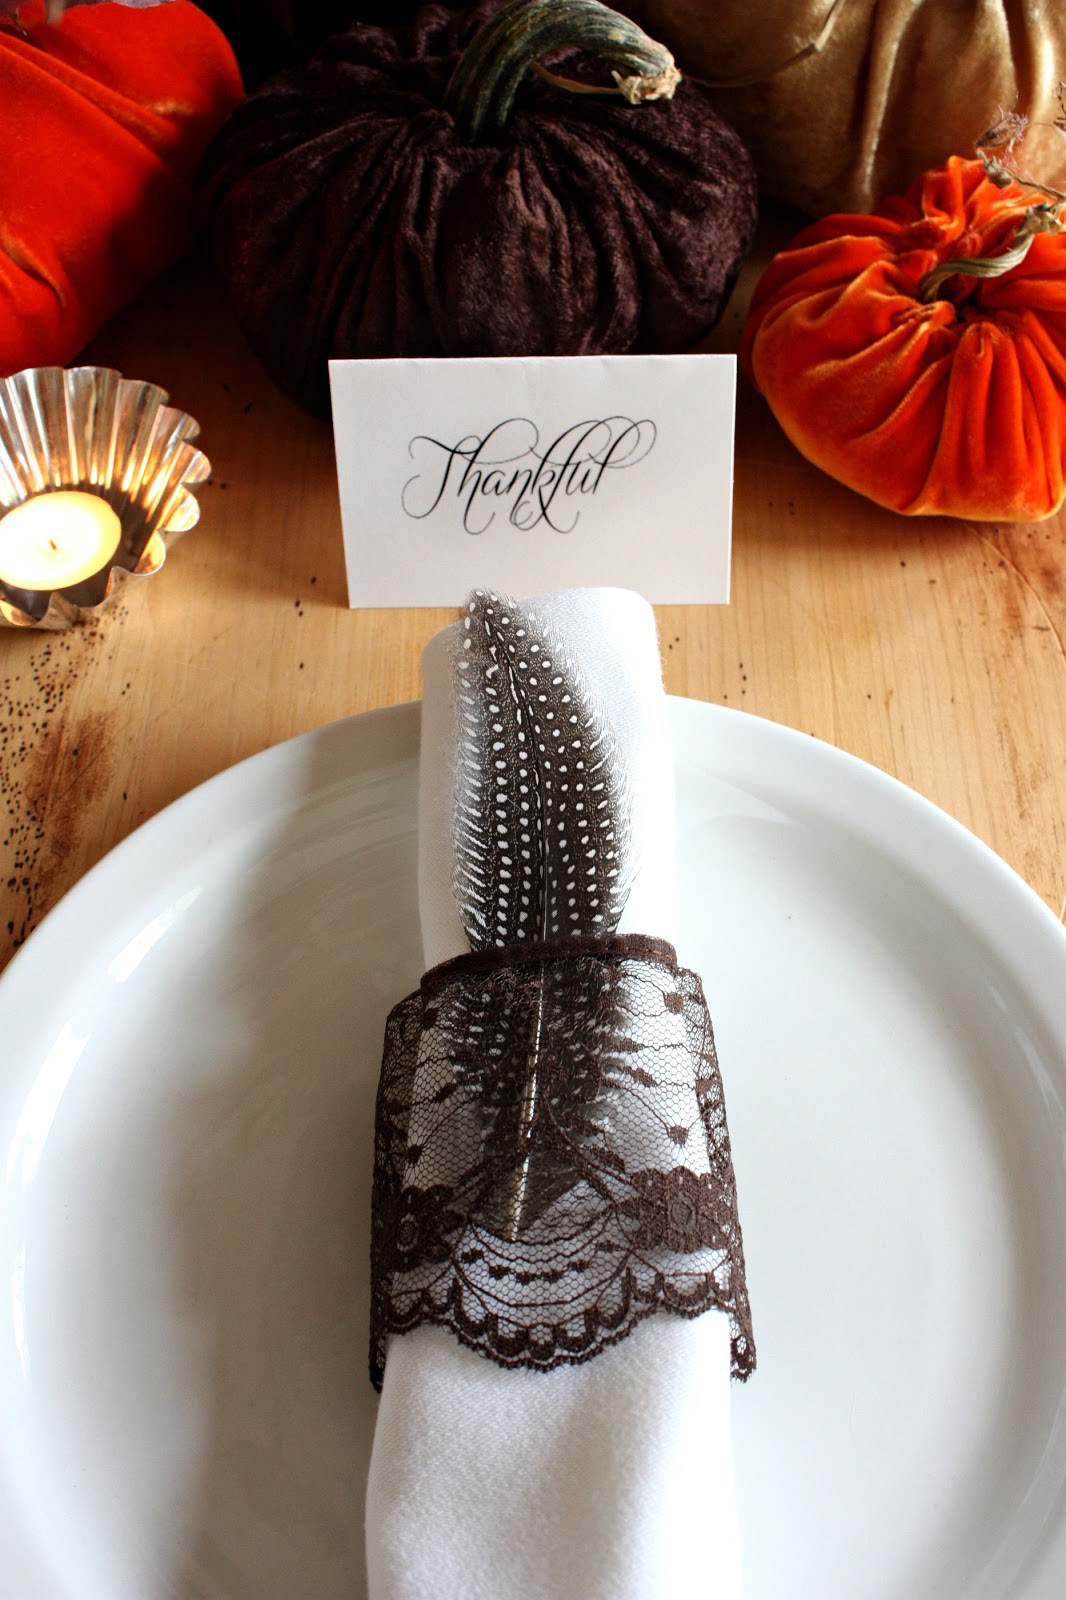 Lace napkin rings